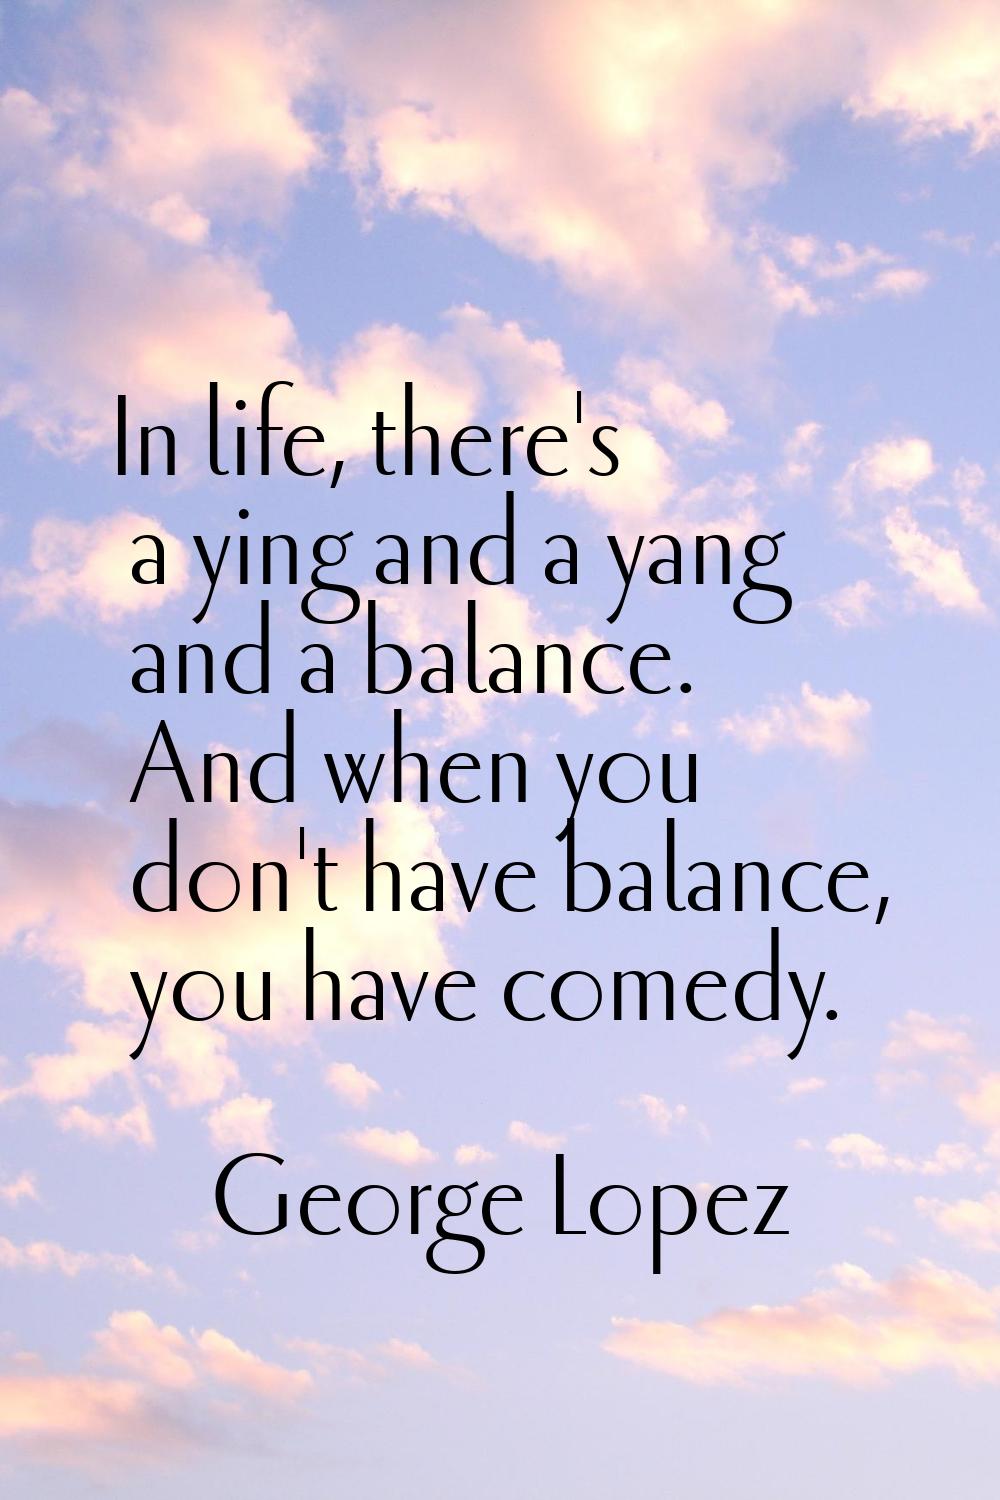 In life, there's a ying and a yang and a balance. And when you don't have balance, you have comedy.